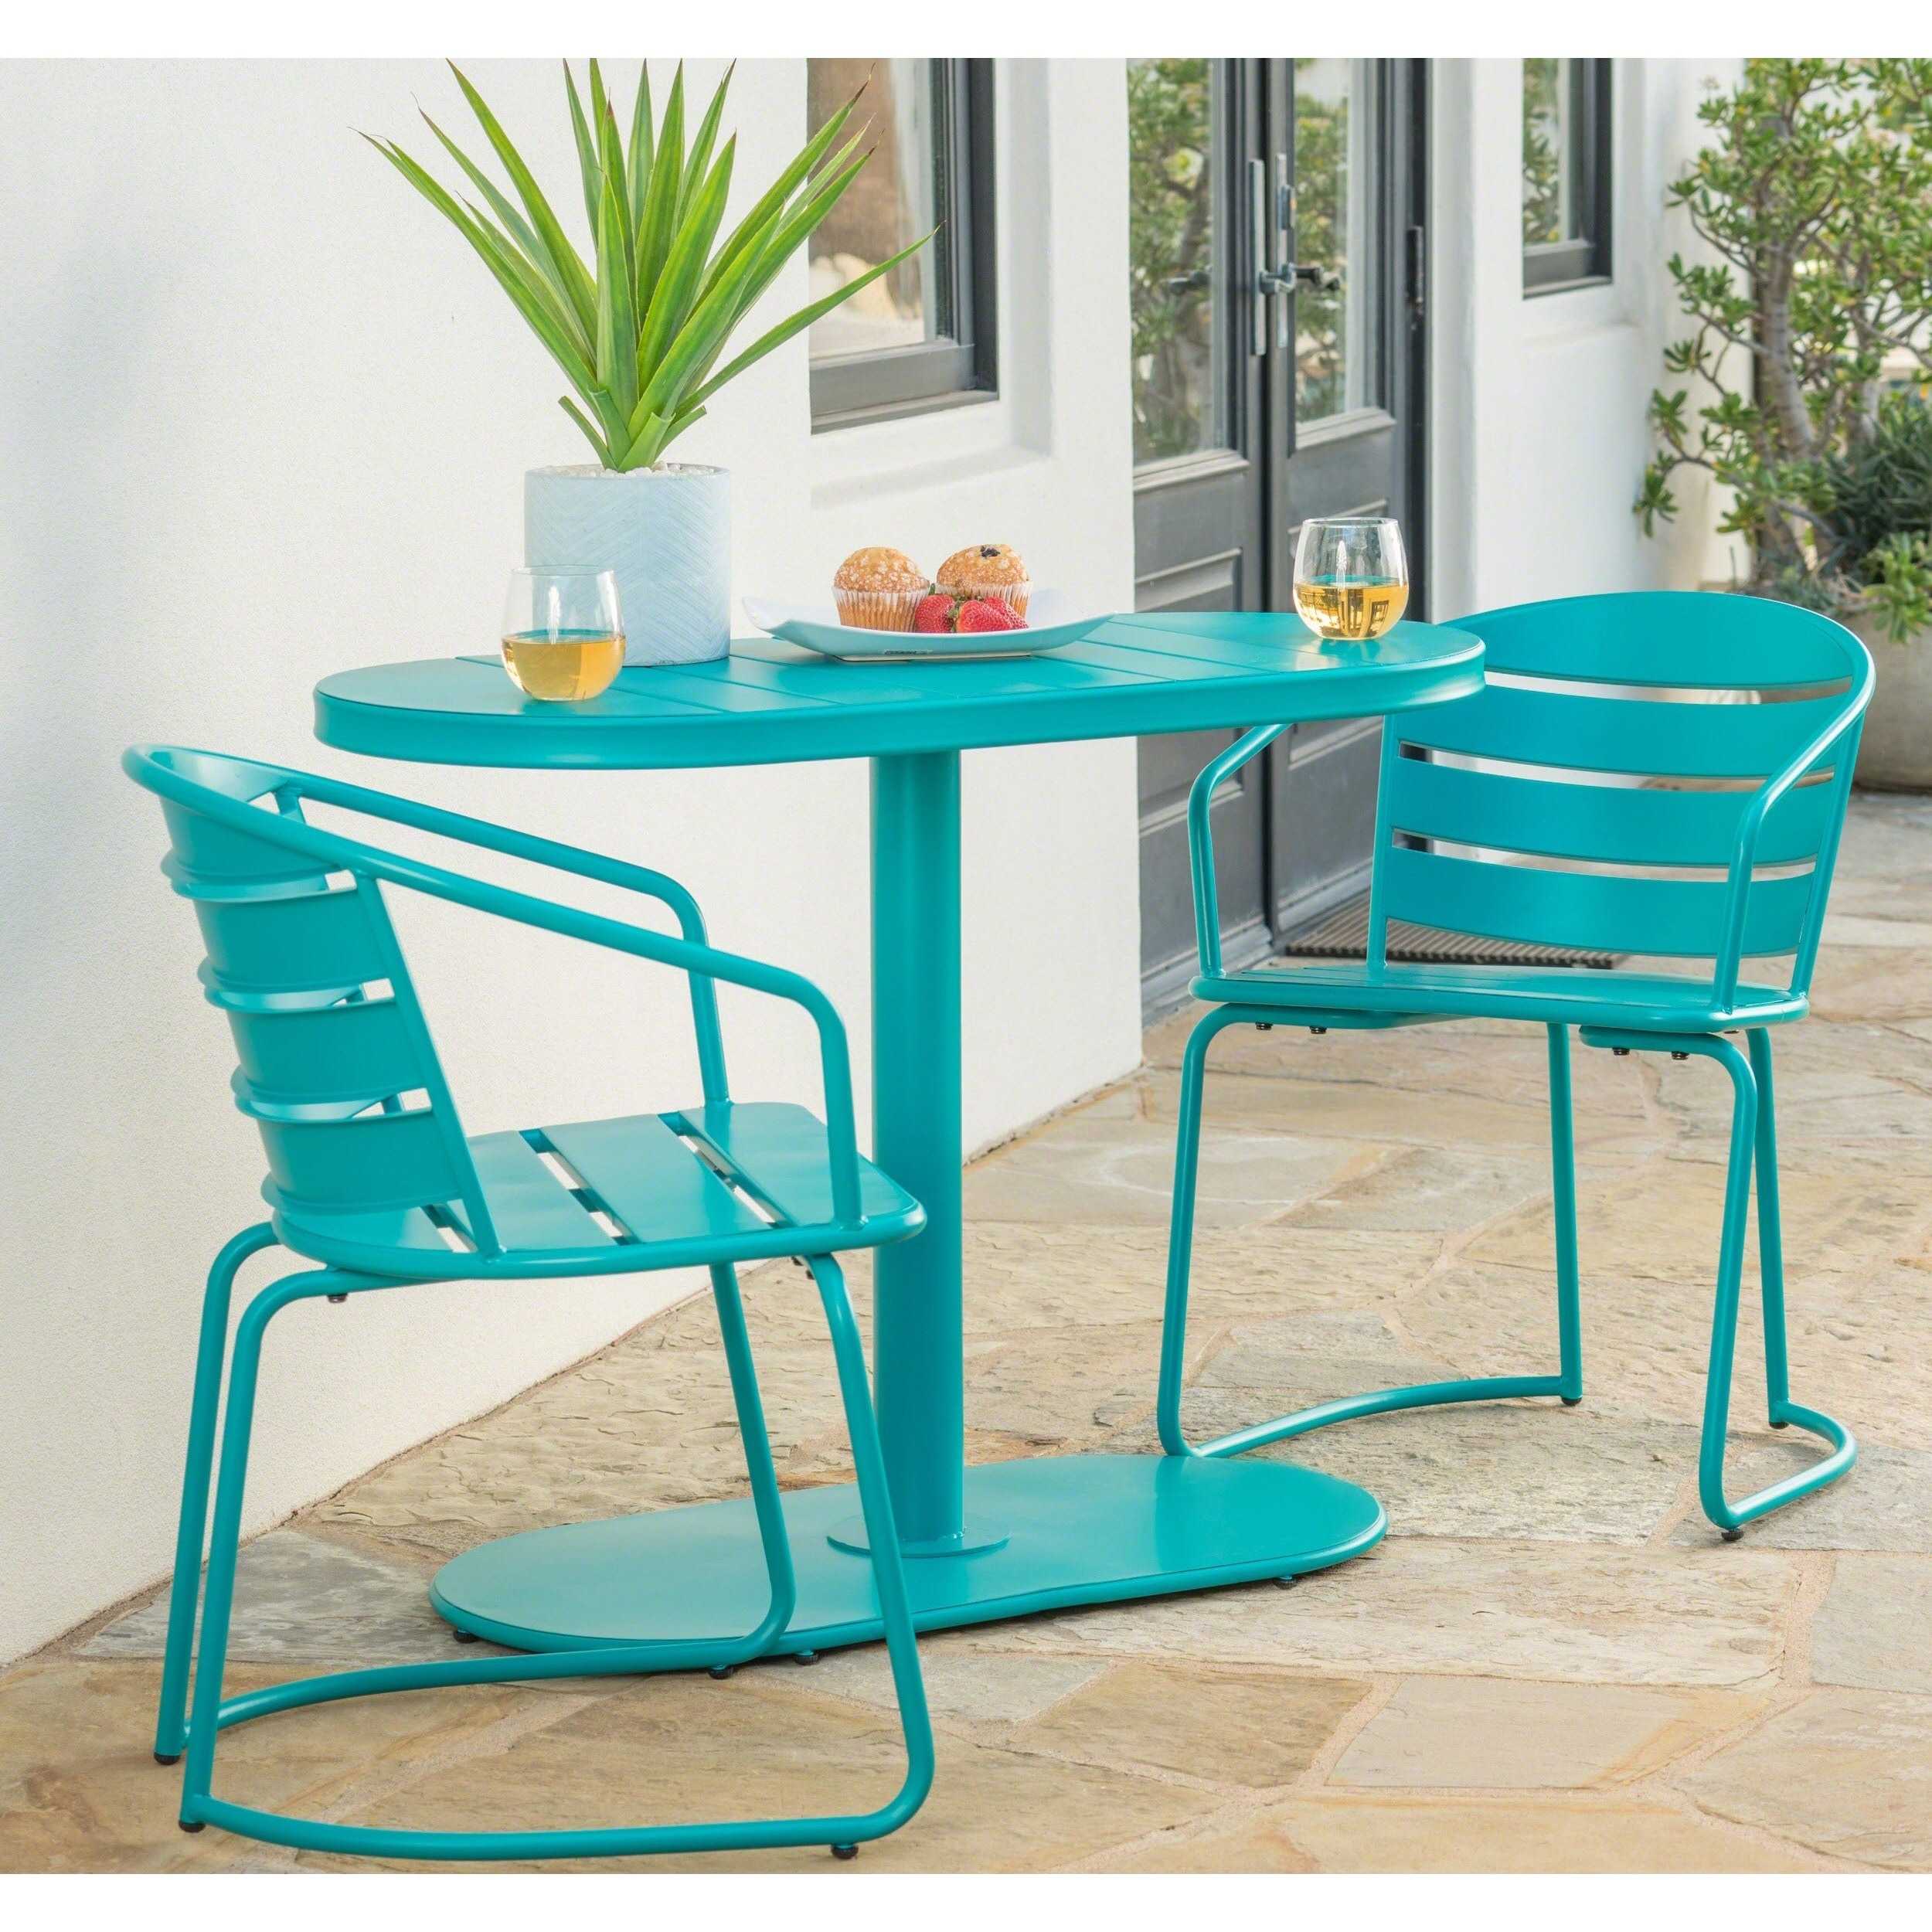 Santa Monica Outdoor 3-Piece Bistro Set by Christopher Knight Home